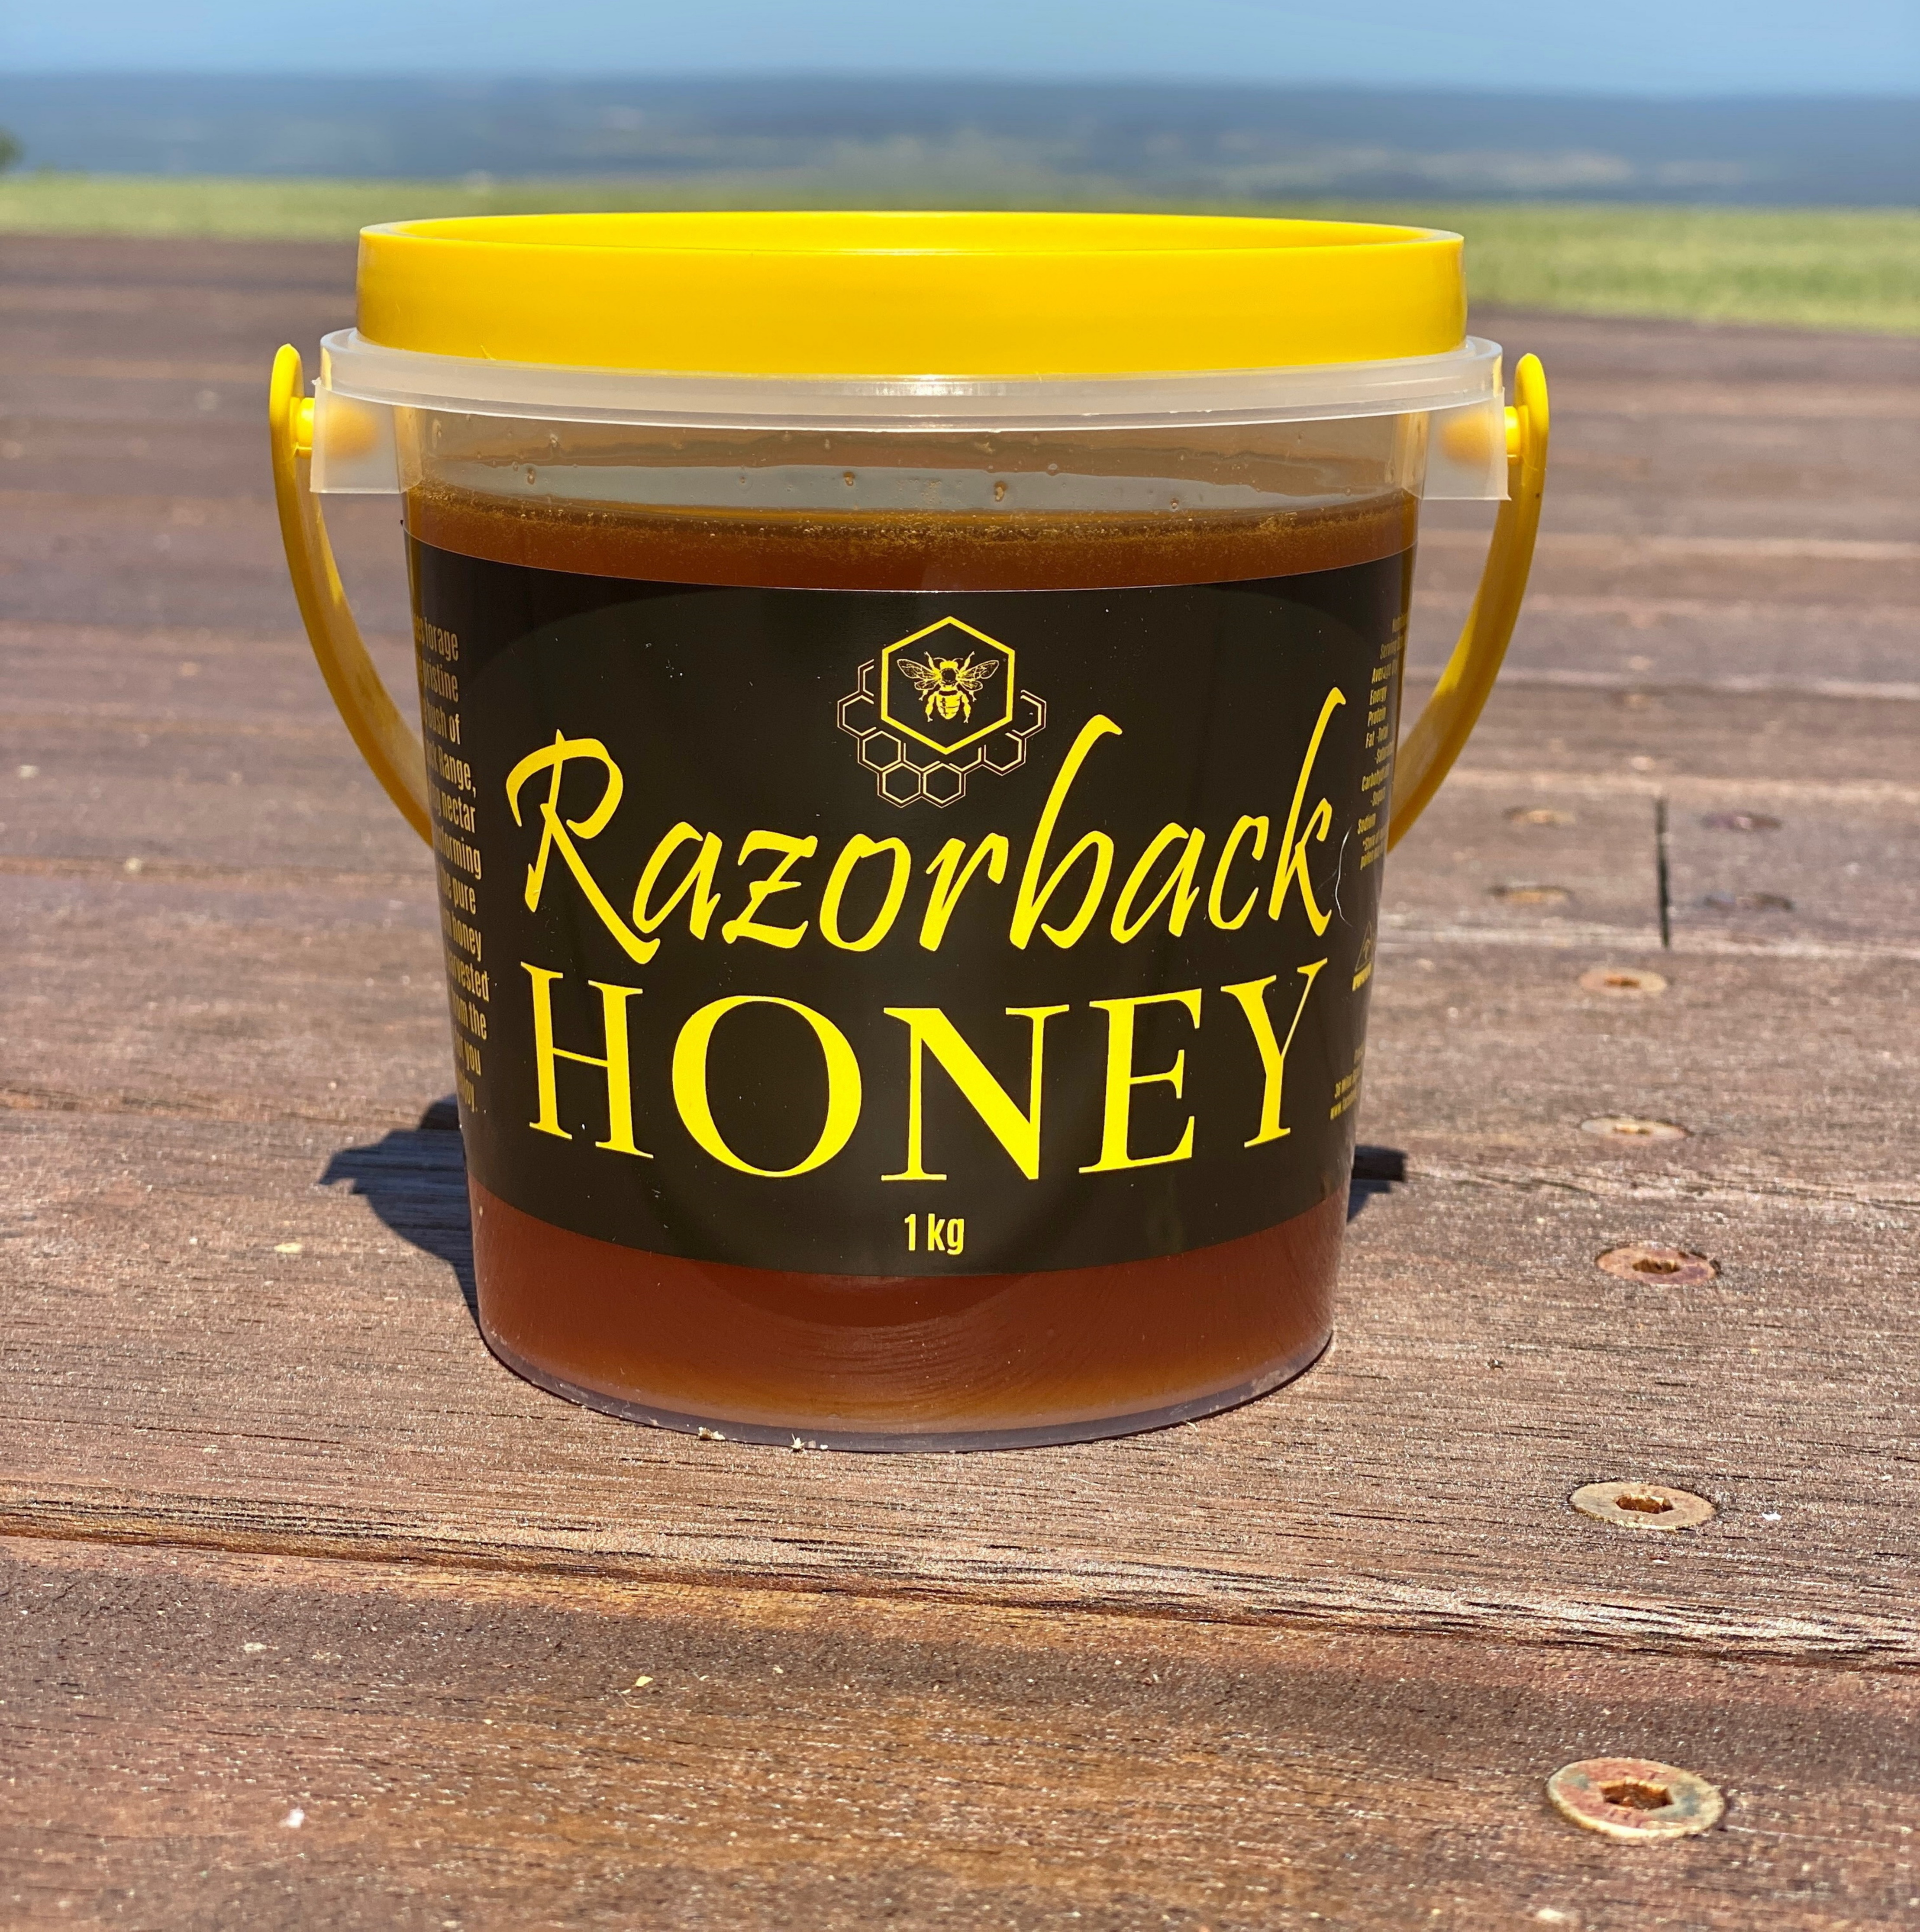 Order your honey today!